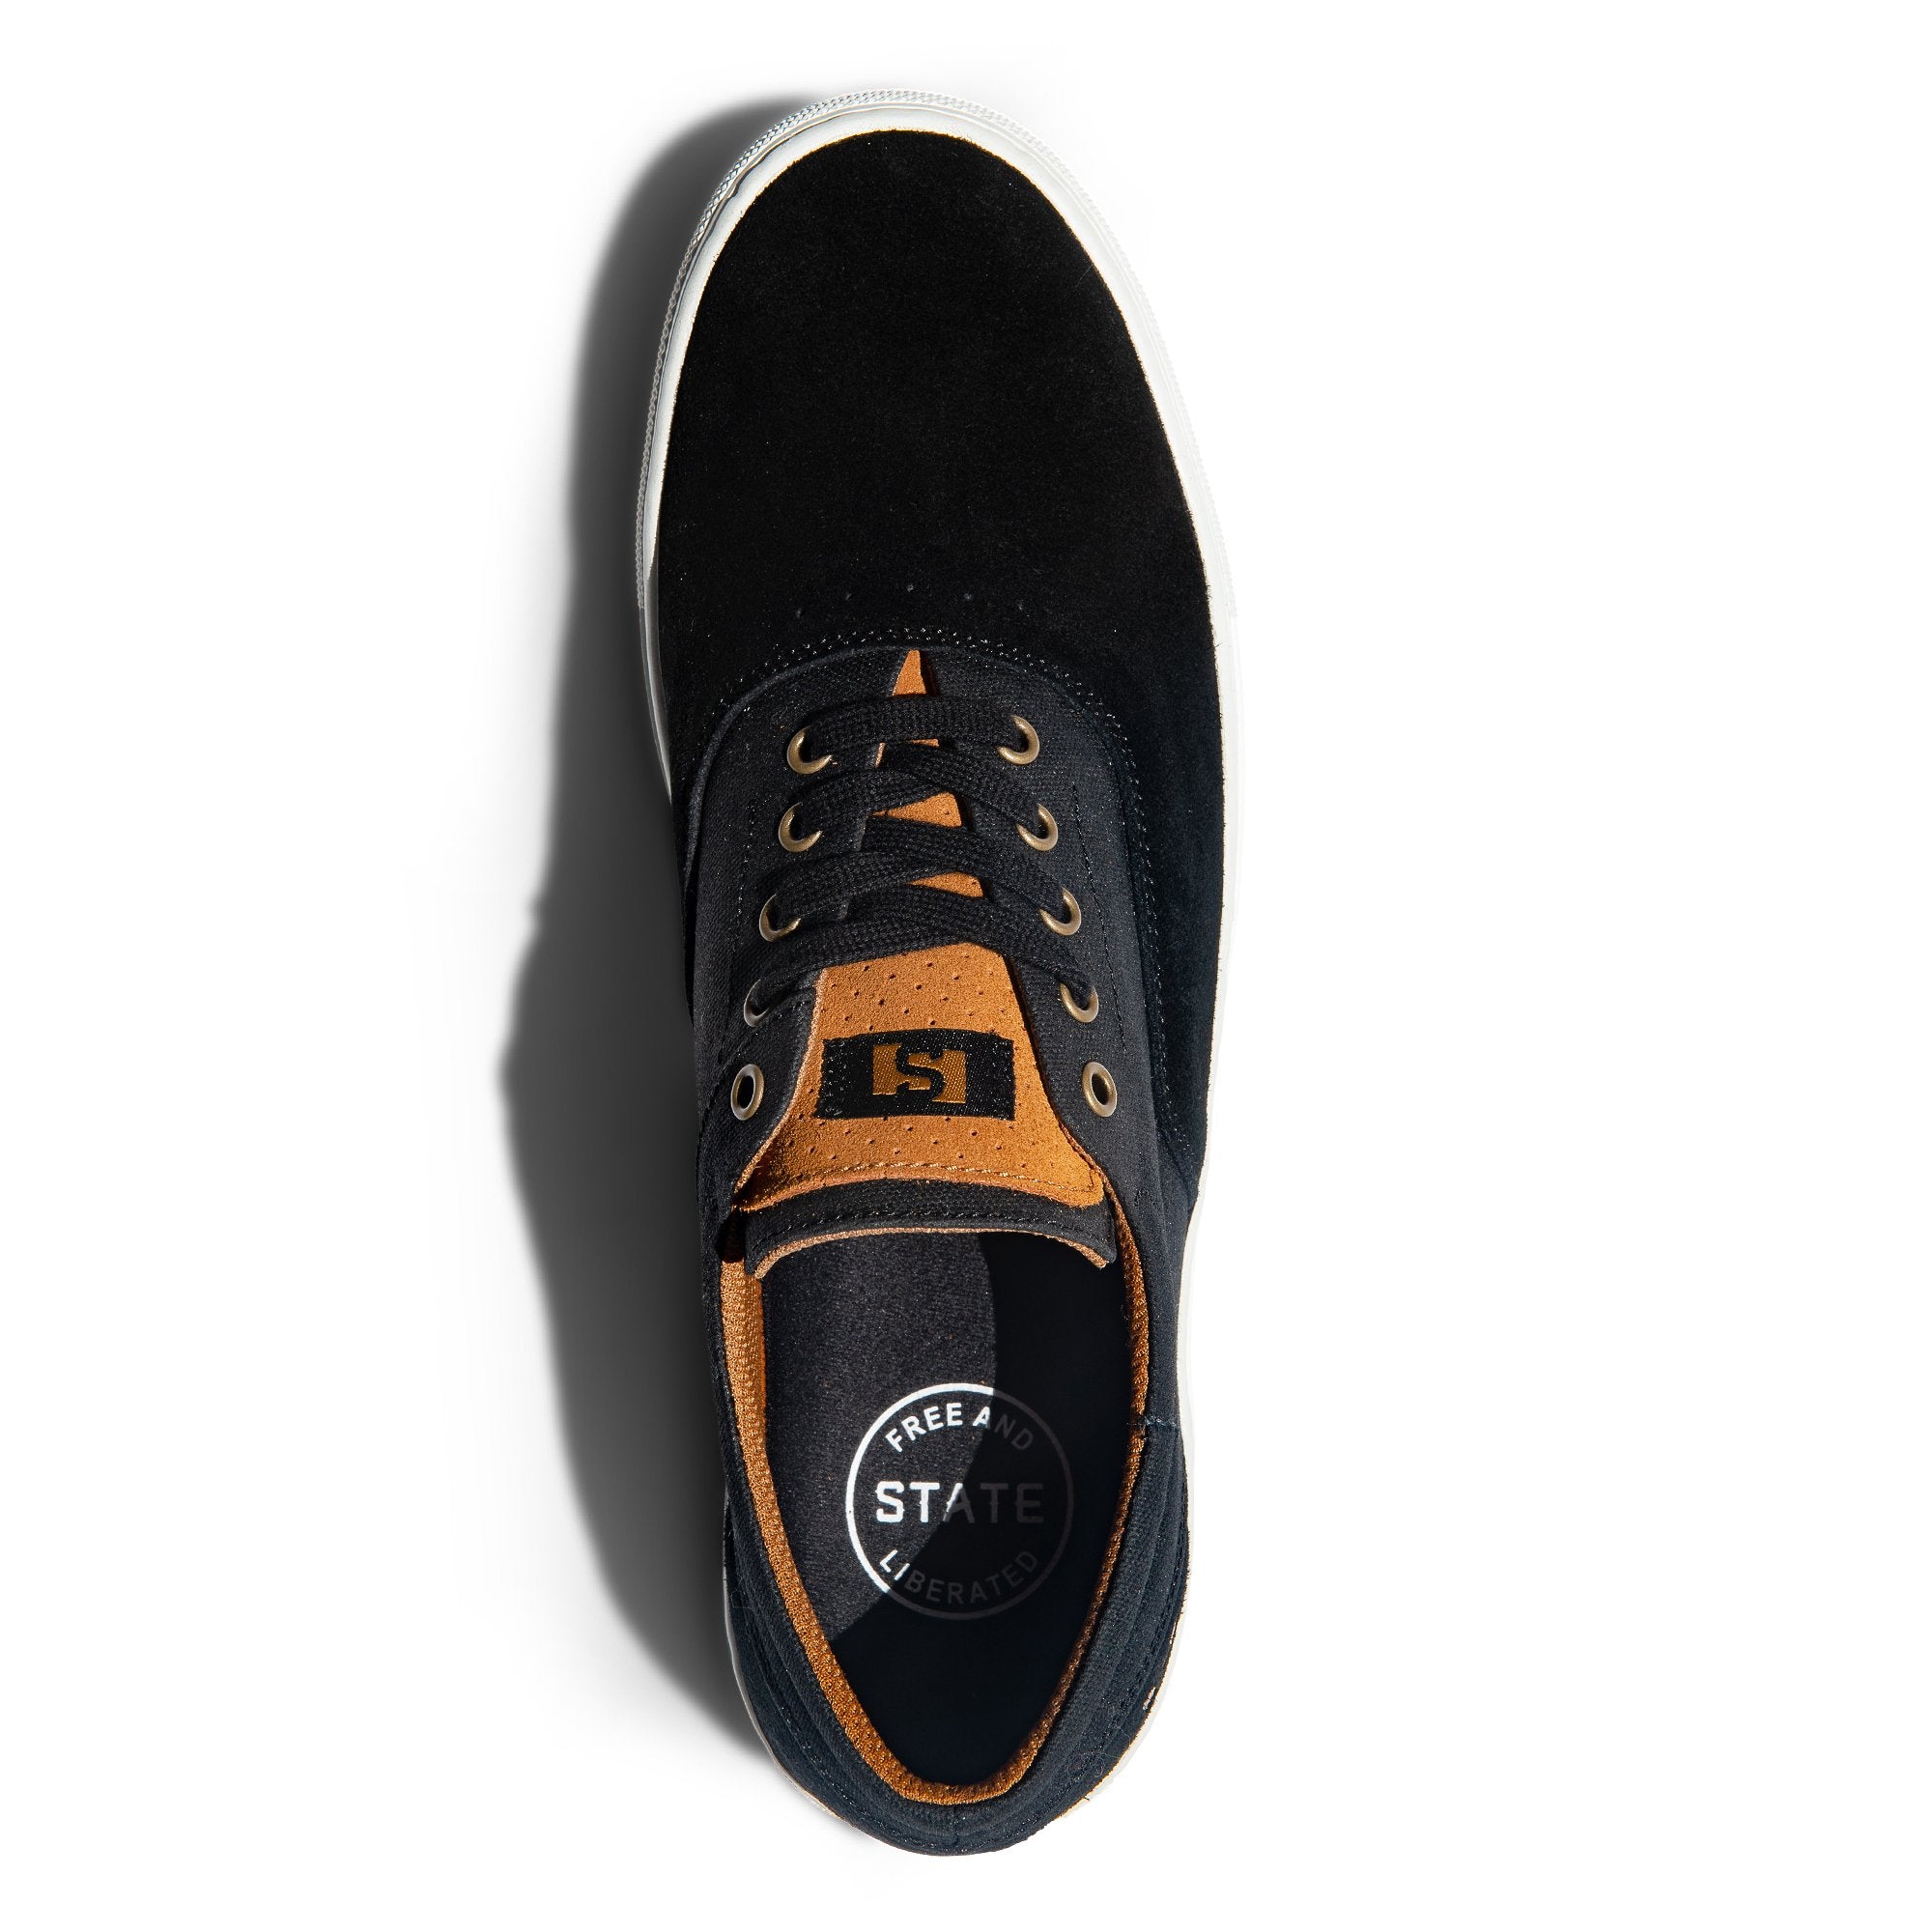 STATE FOOTWEAR PACIFICA CUP SOLE BLACK/WHITE - The Drive Skateshop